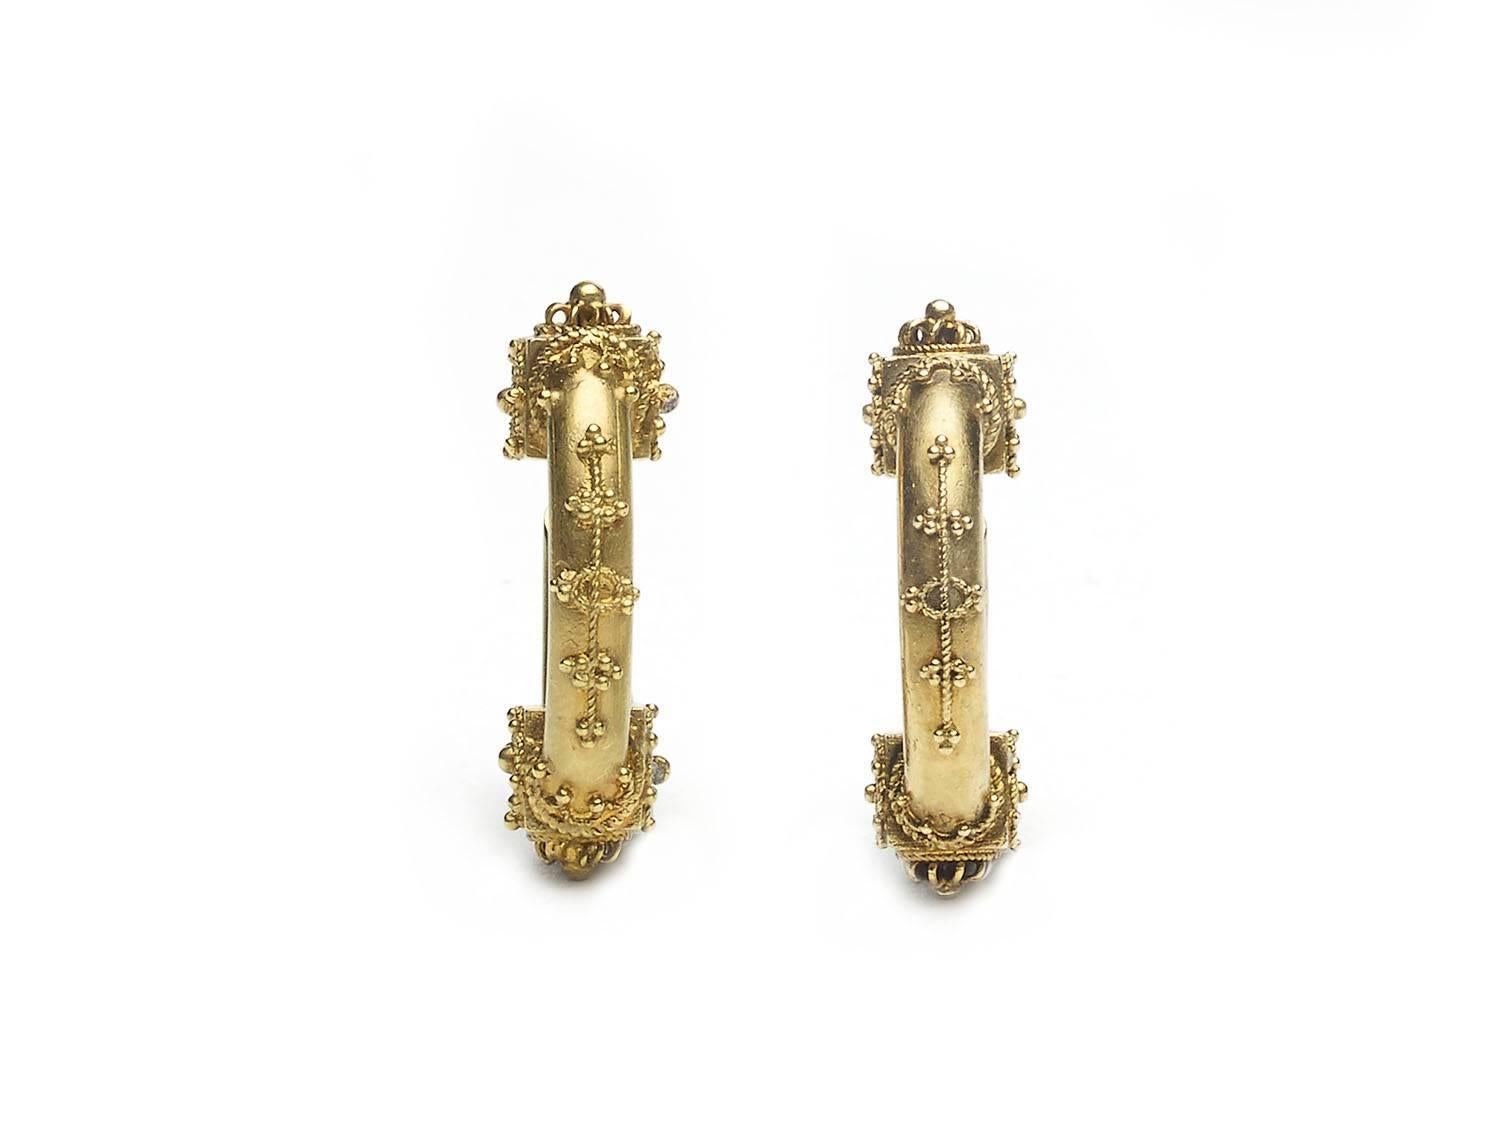 A pair of Victoria Etruscan style hoop earrings, set in gold with wire fitting, circa 1870.
Inside diameter measures 16 x 10mm.